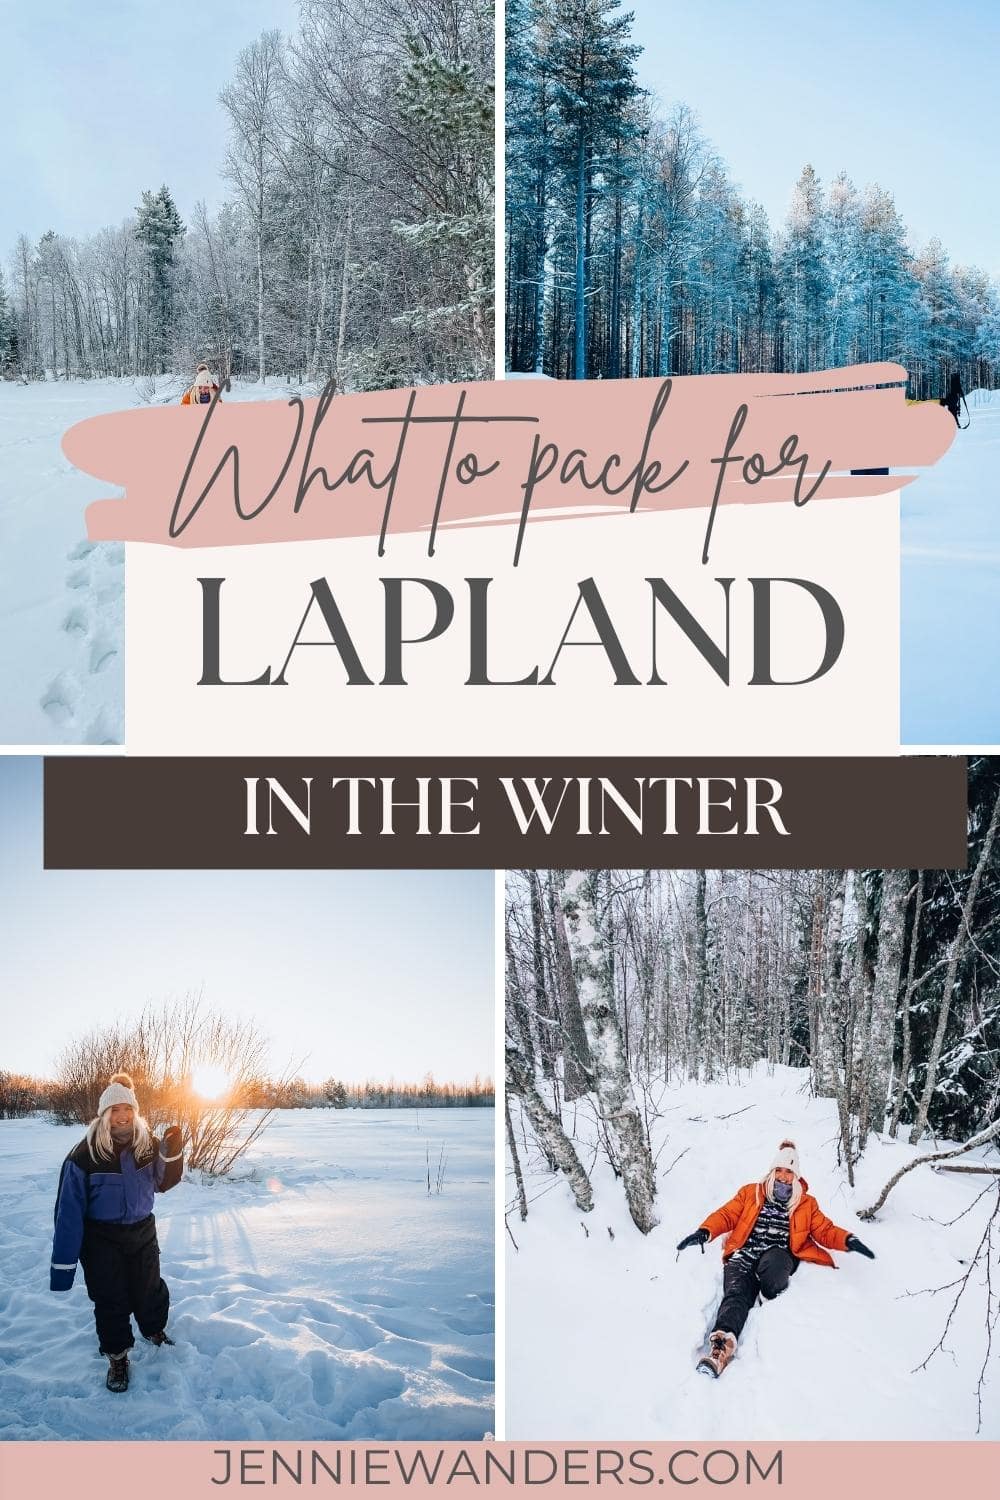 WHAT TO WEAR IN LAPLAND